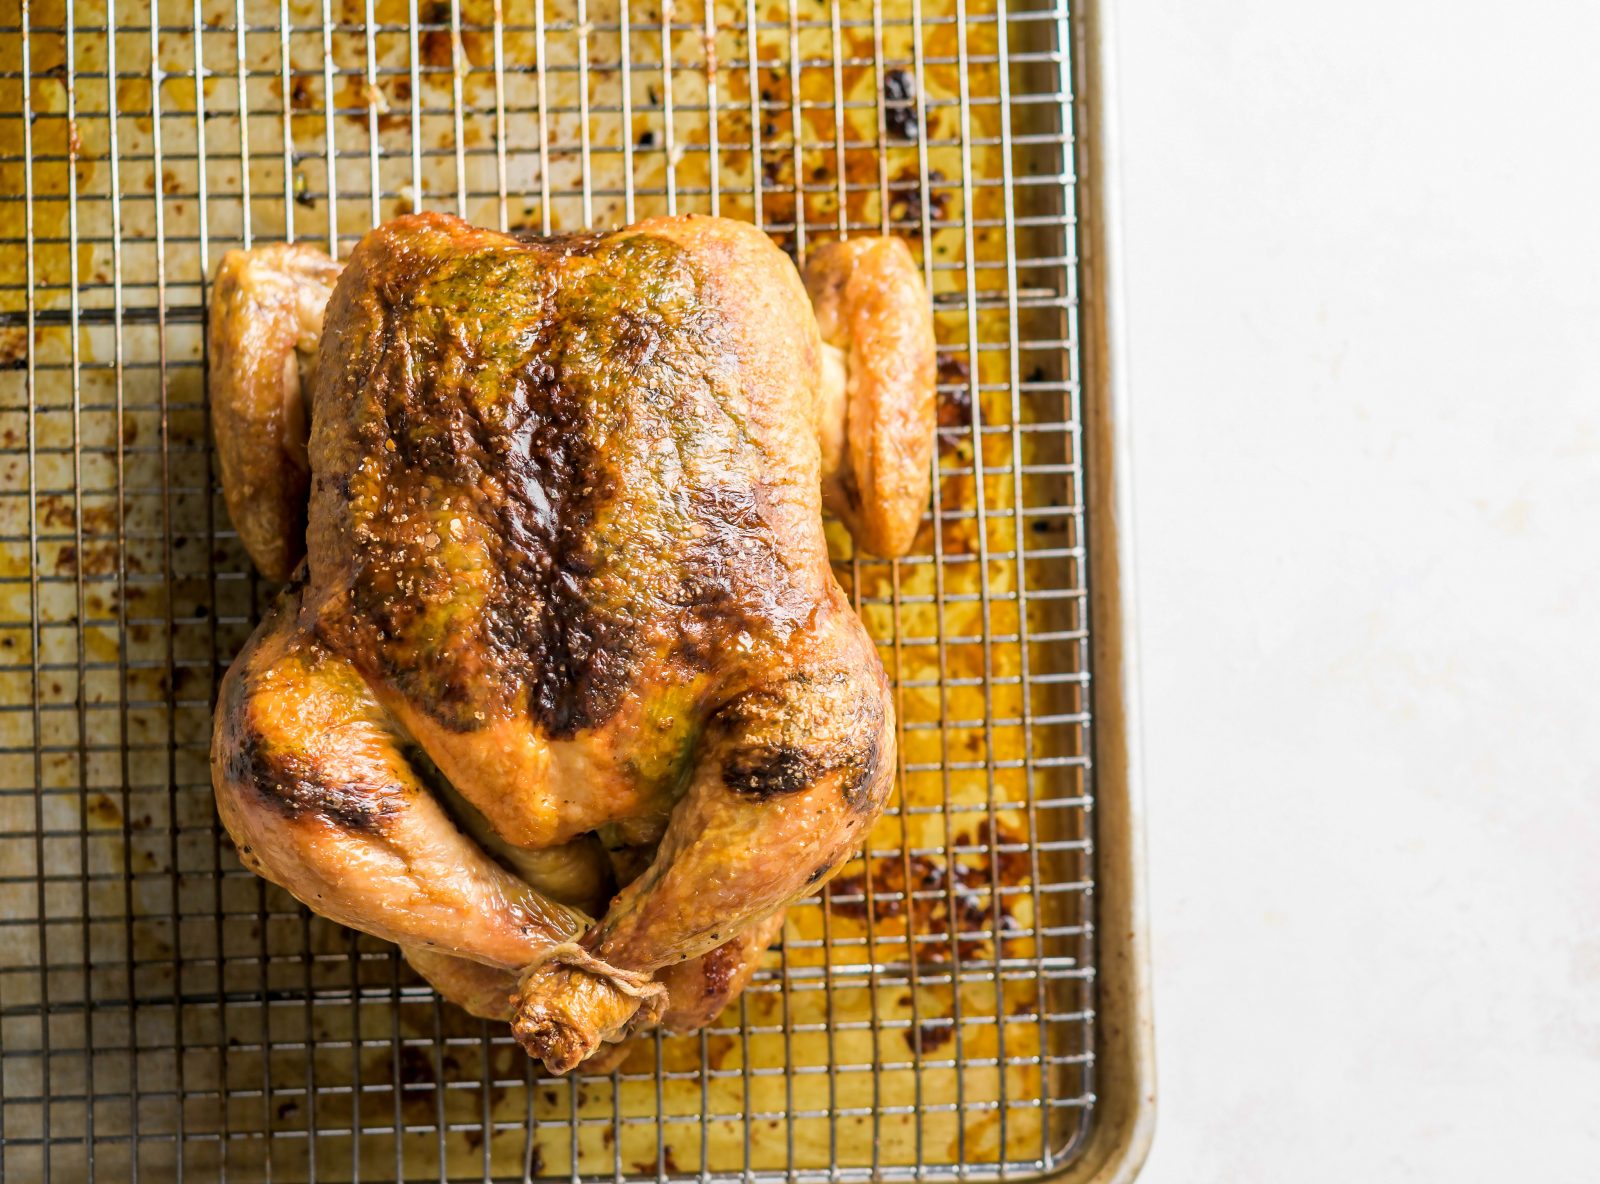 Green Chili Herb Roasted Chicken